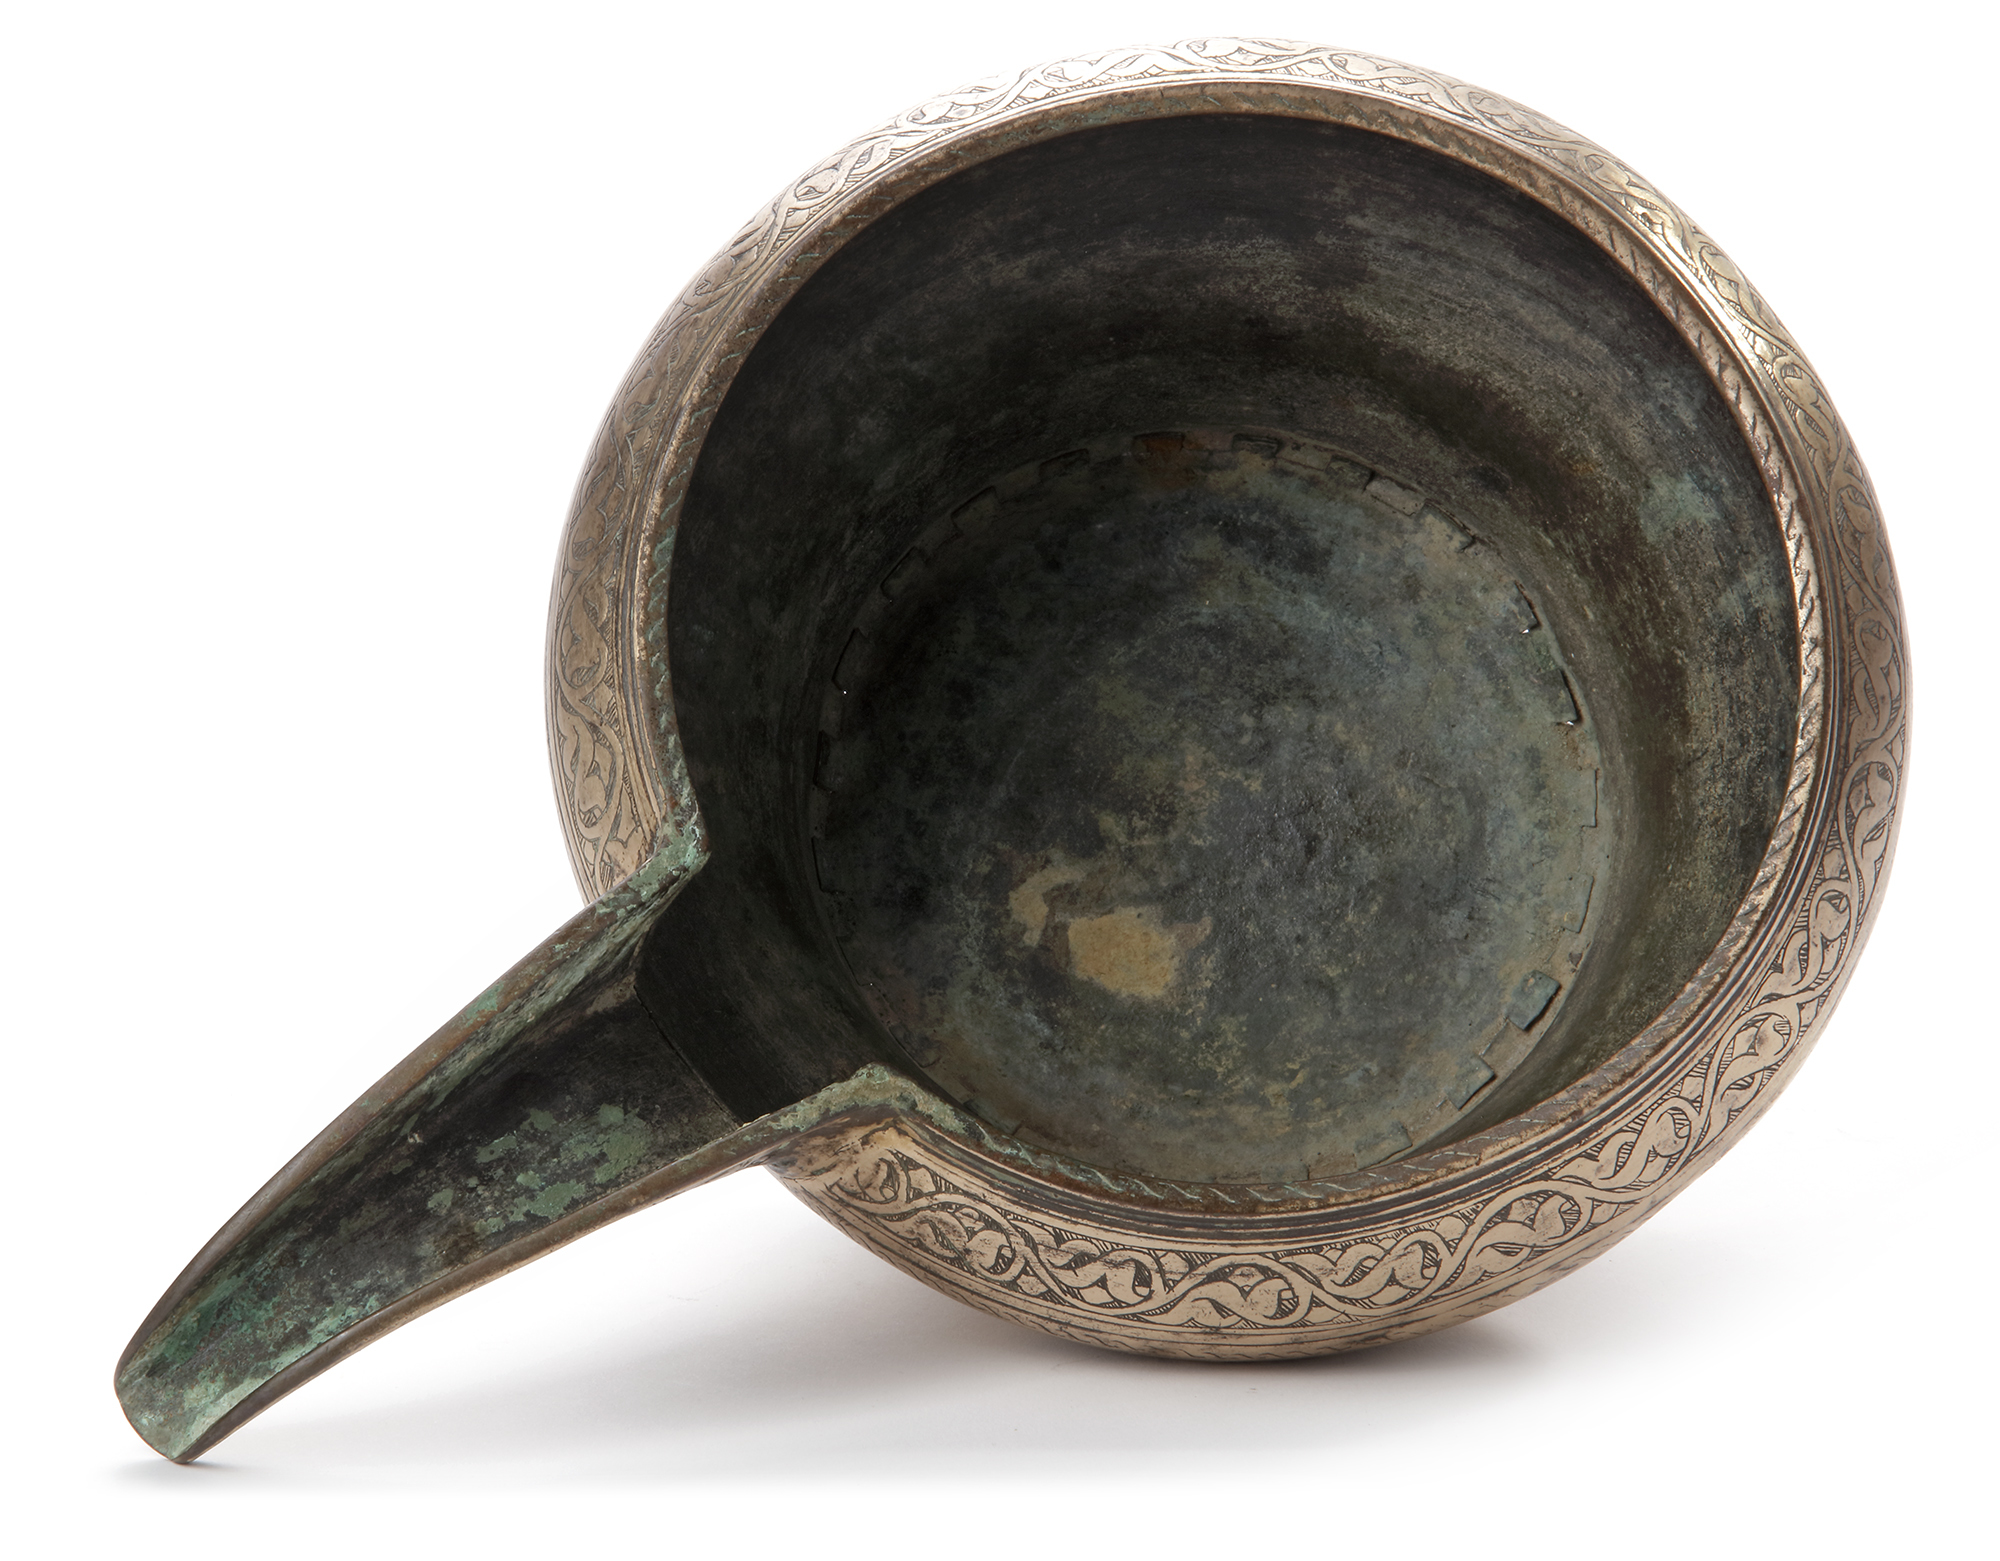 AN ENGRAVED SAFAVID TINNED COPPER SPOUTED POURING BOWL, PERSIA, 17TH CENTURY - Image 3 of 4